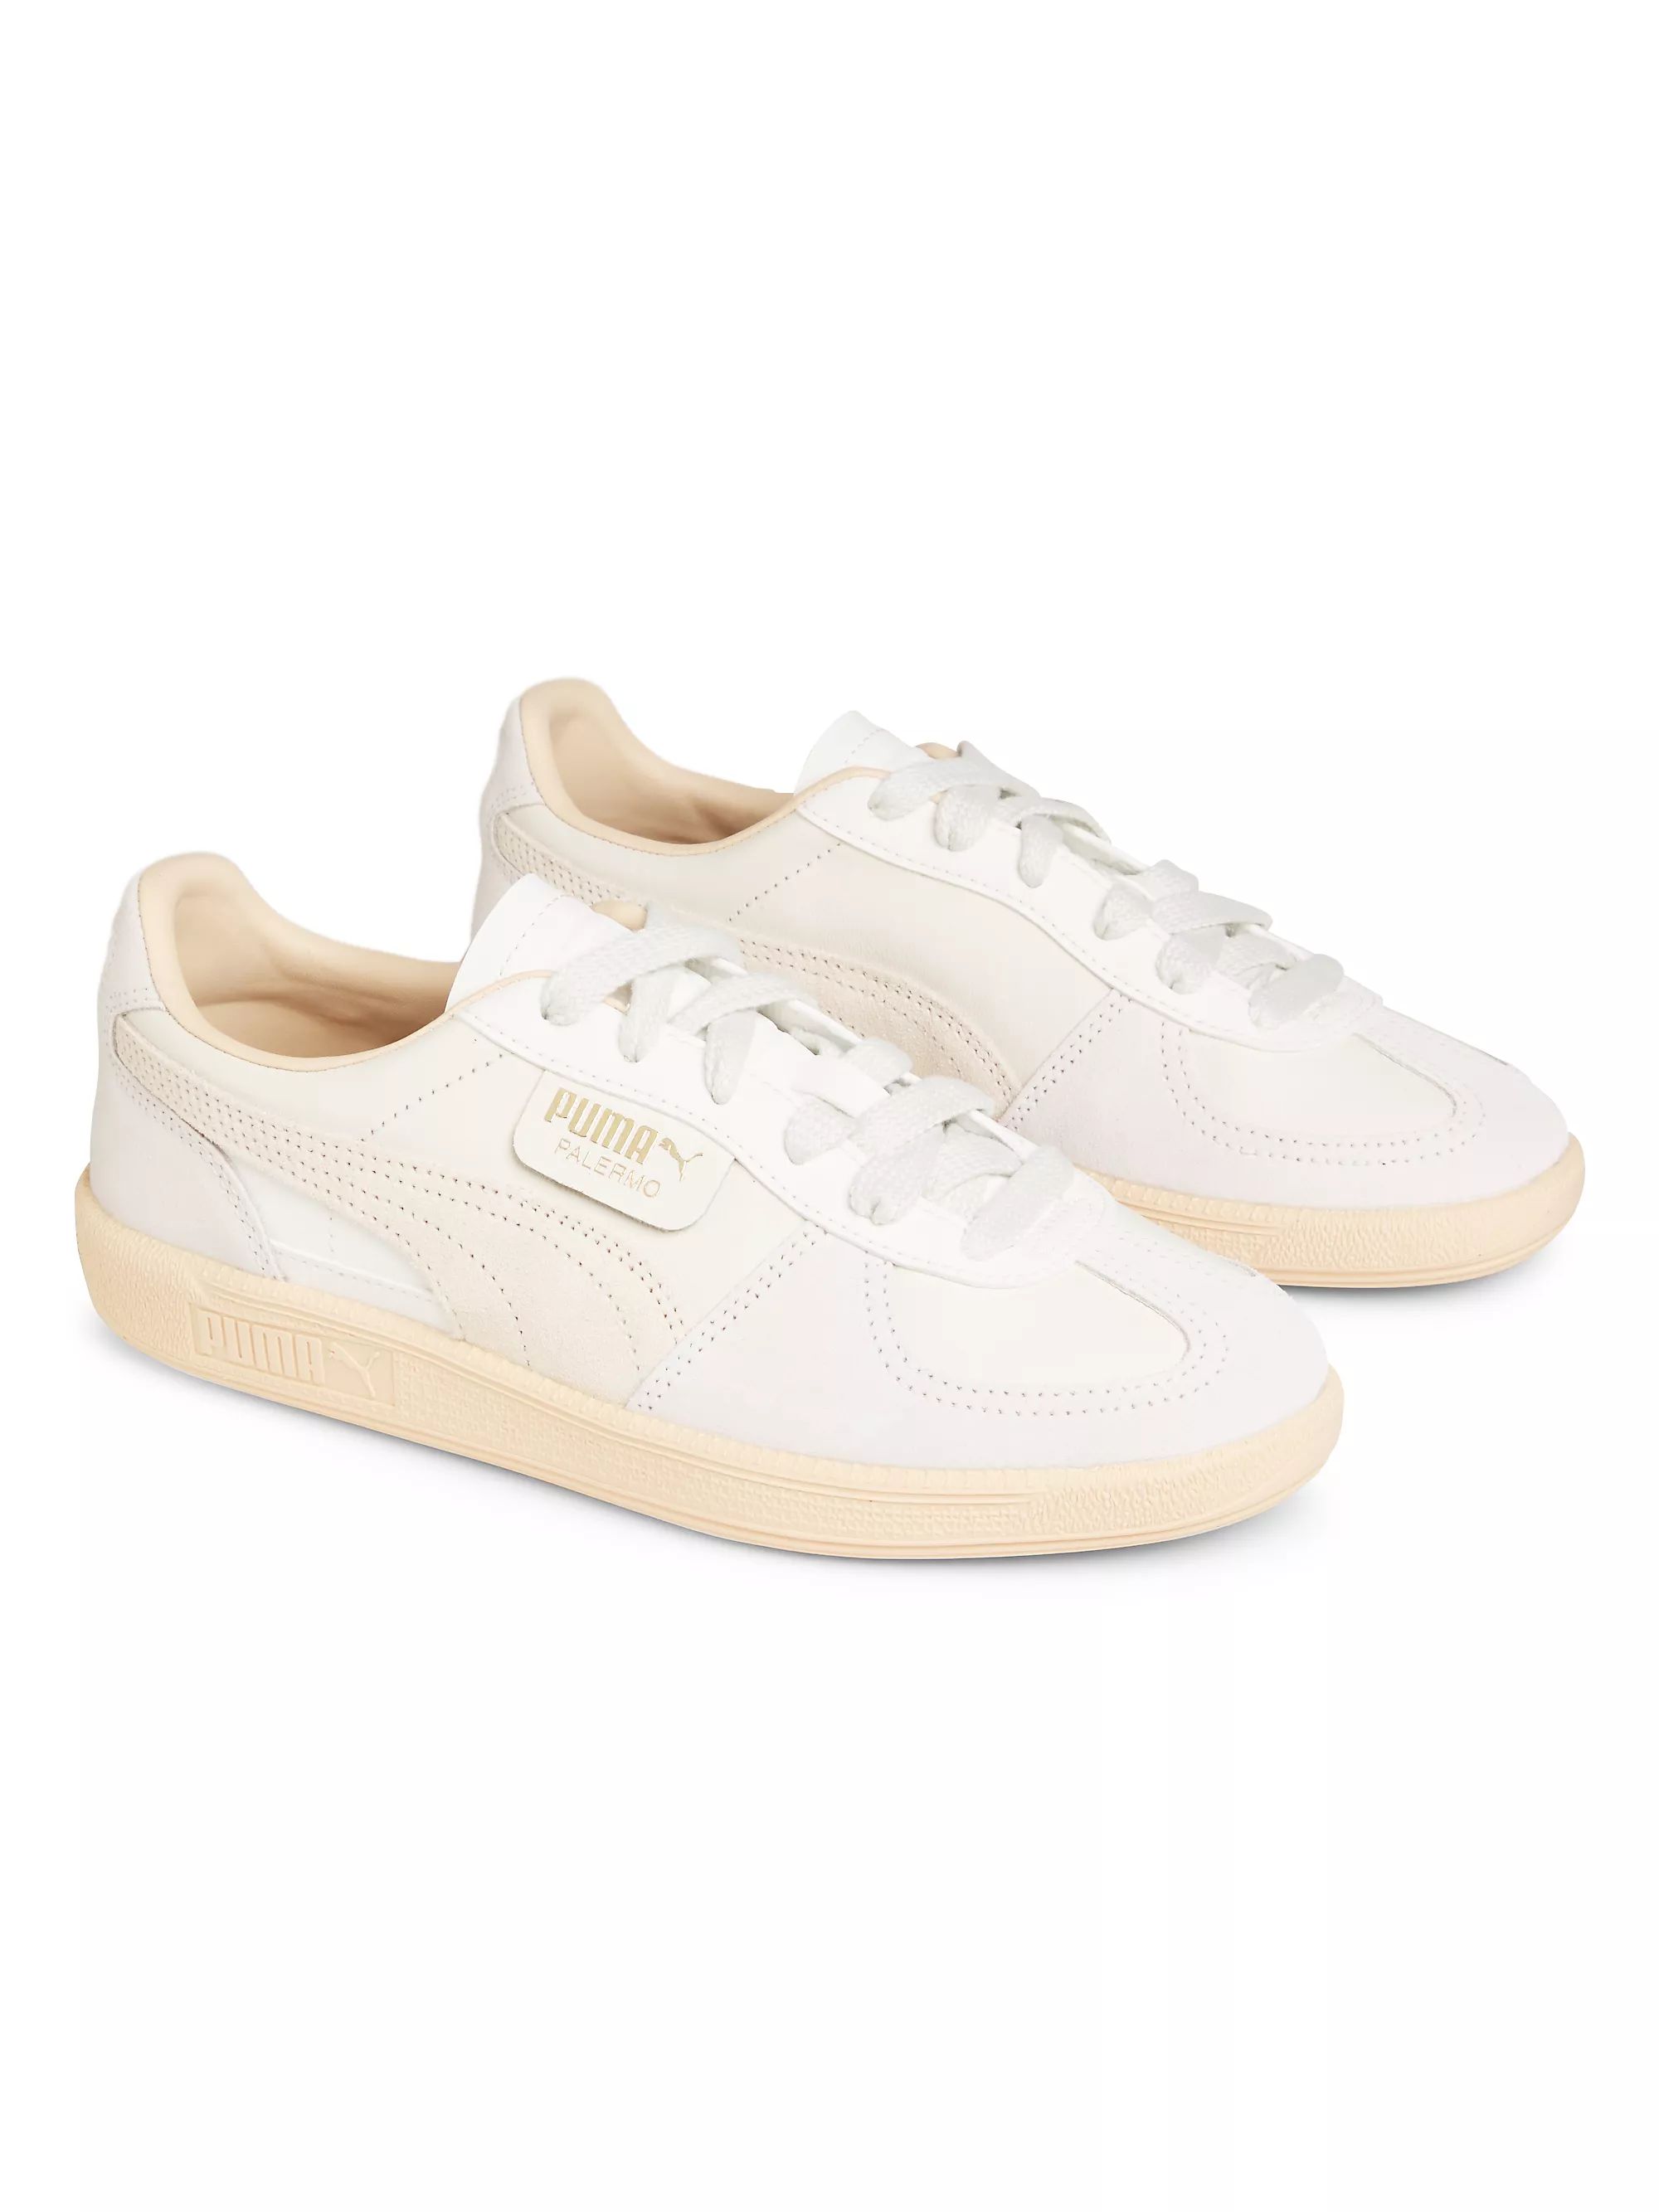 Palermo Suede & Leather Sneakers | Saks Fifth Avenue